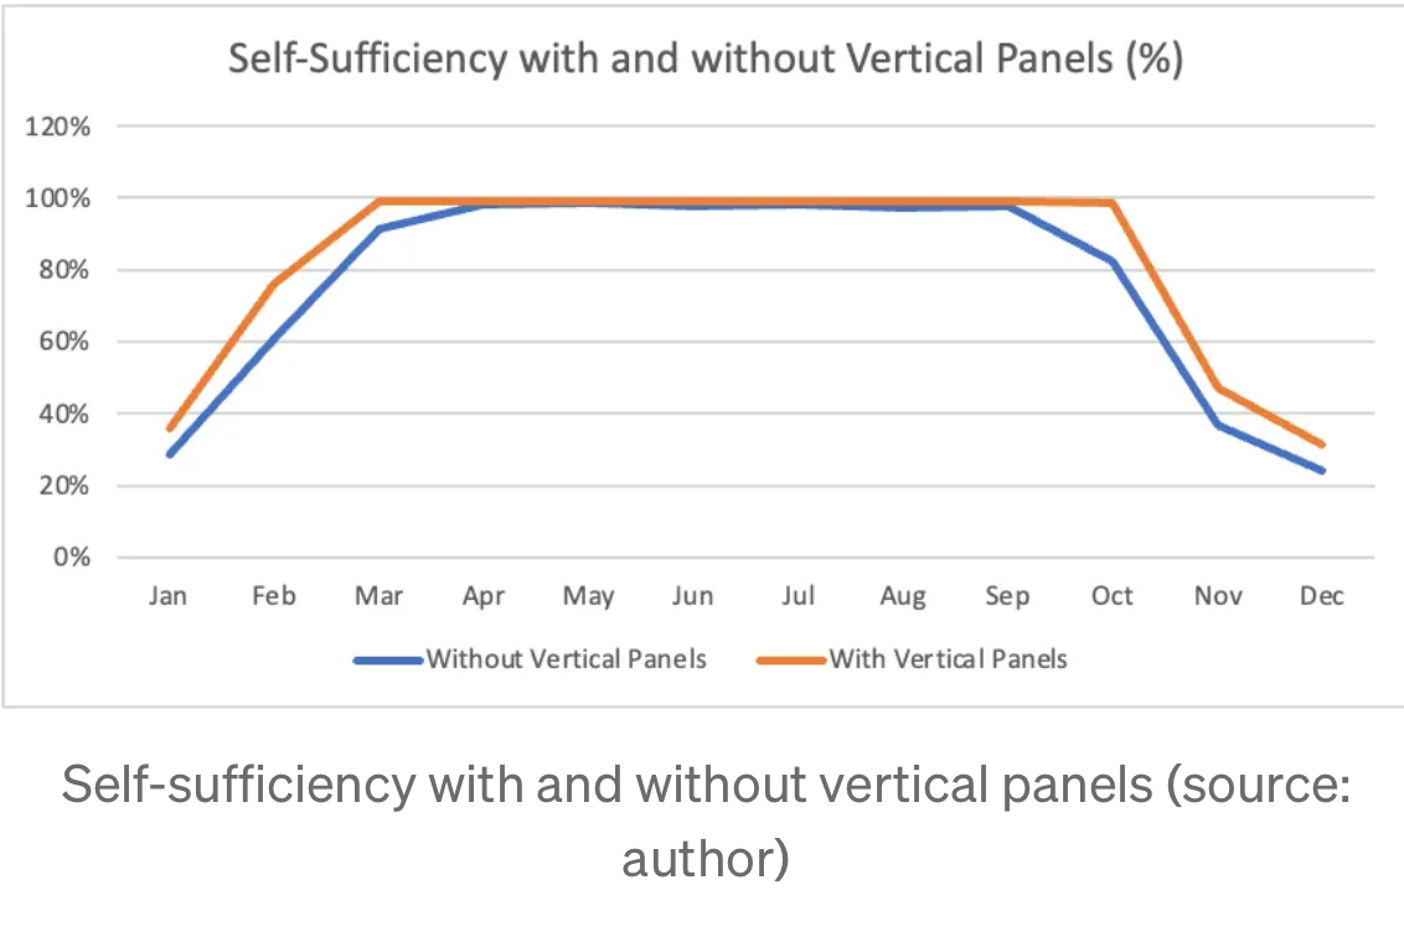 graph on self-sufficiency with and without vertical panels